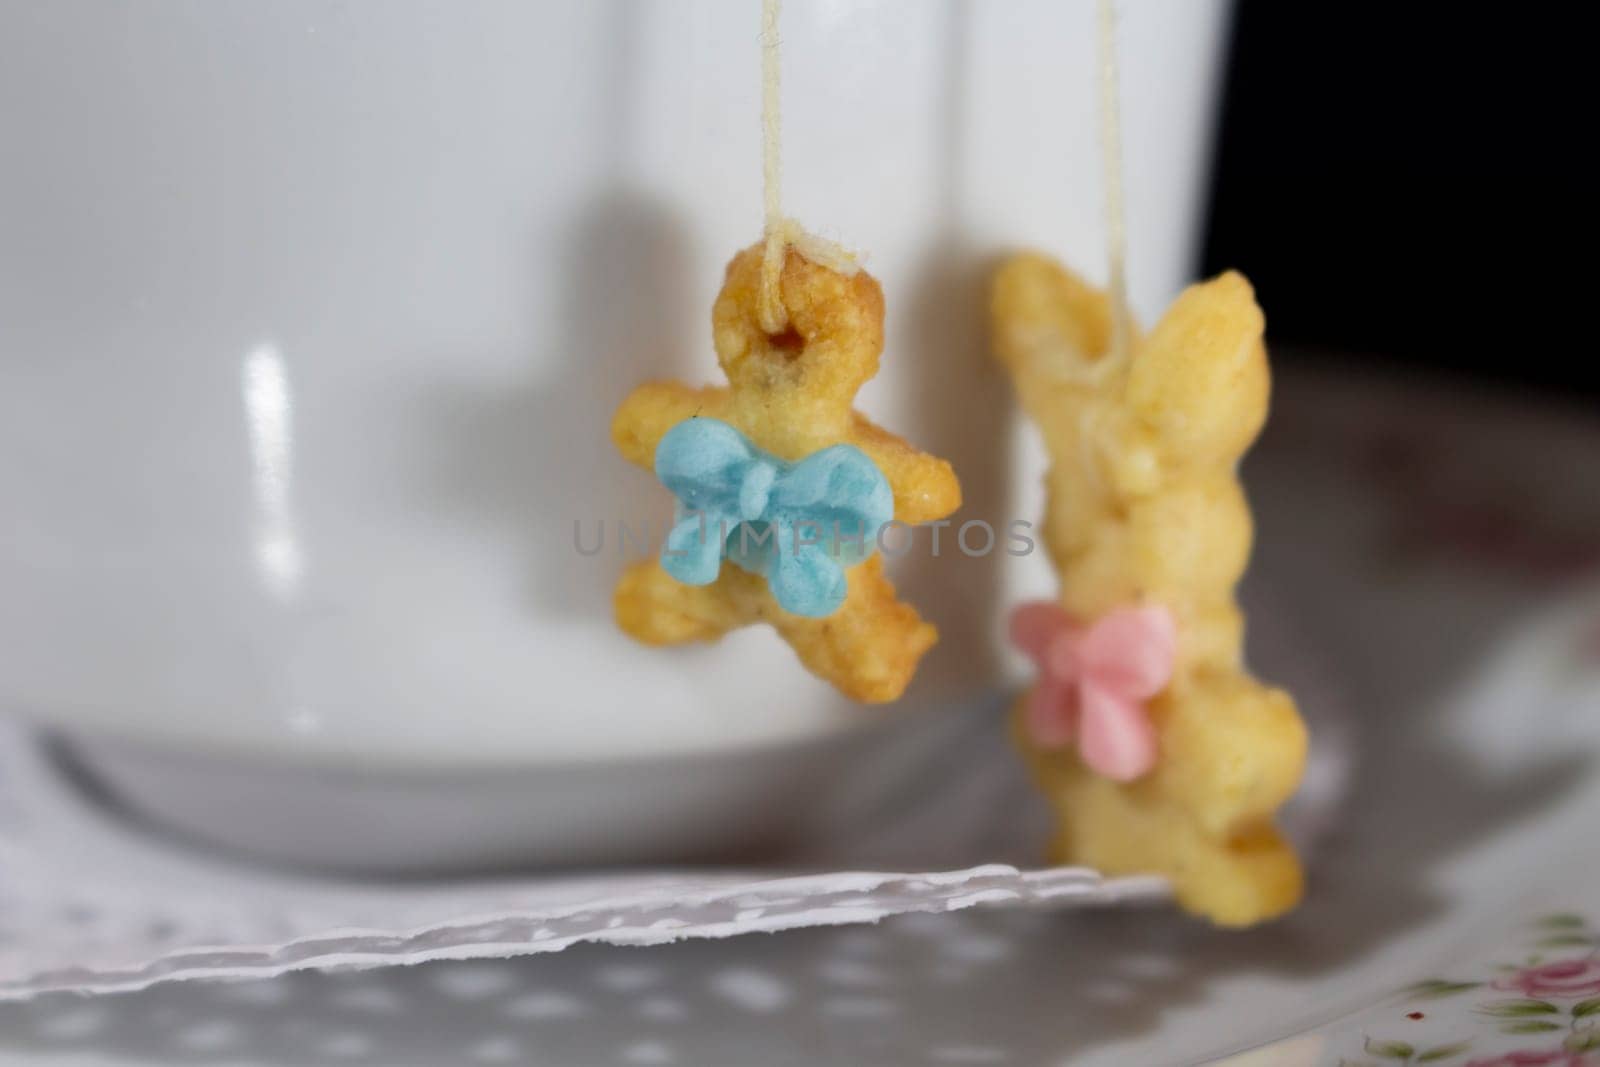 close-up of two bunny-shaped candies hanging from an old-fashioned teacup by Raulmartin